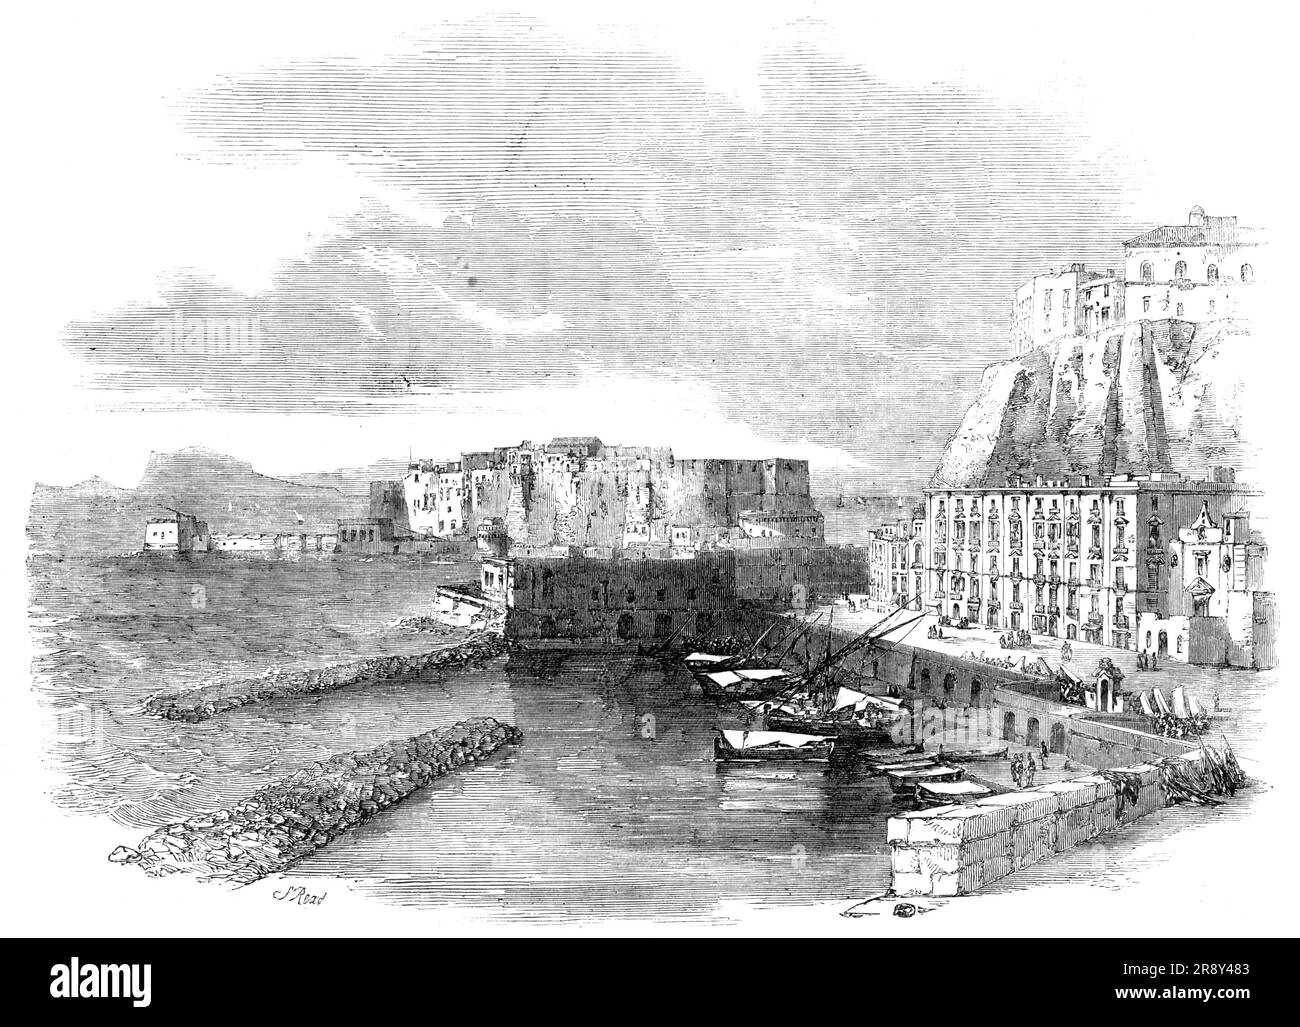 Pizzofalcone and Castello dell'Uovo, at Naples, 1857. 'Castello dell'Uovo...is situated on a small rocky island, once called Megari, and derives its name from its shape. It was built by William I., in 1154...in 1221, King Frederic completed and much strengthened the building. In the fifteenth century King James fled to this castle from the persecutions of his wife, the Queen Johanna...it has always been deemed an important point by the Sovereigns of this country. Weak for external resistance, it is strong for the maintenance of the order of the city, and to such an object it seems now to be ap Stock Photo